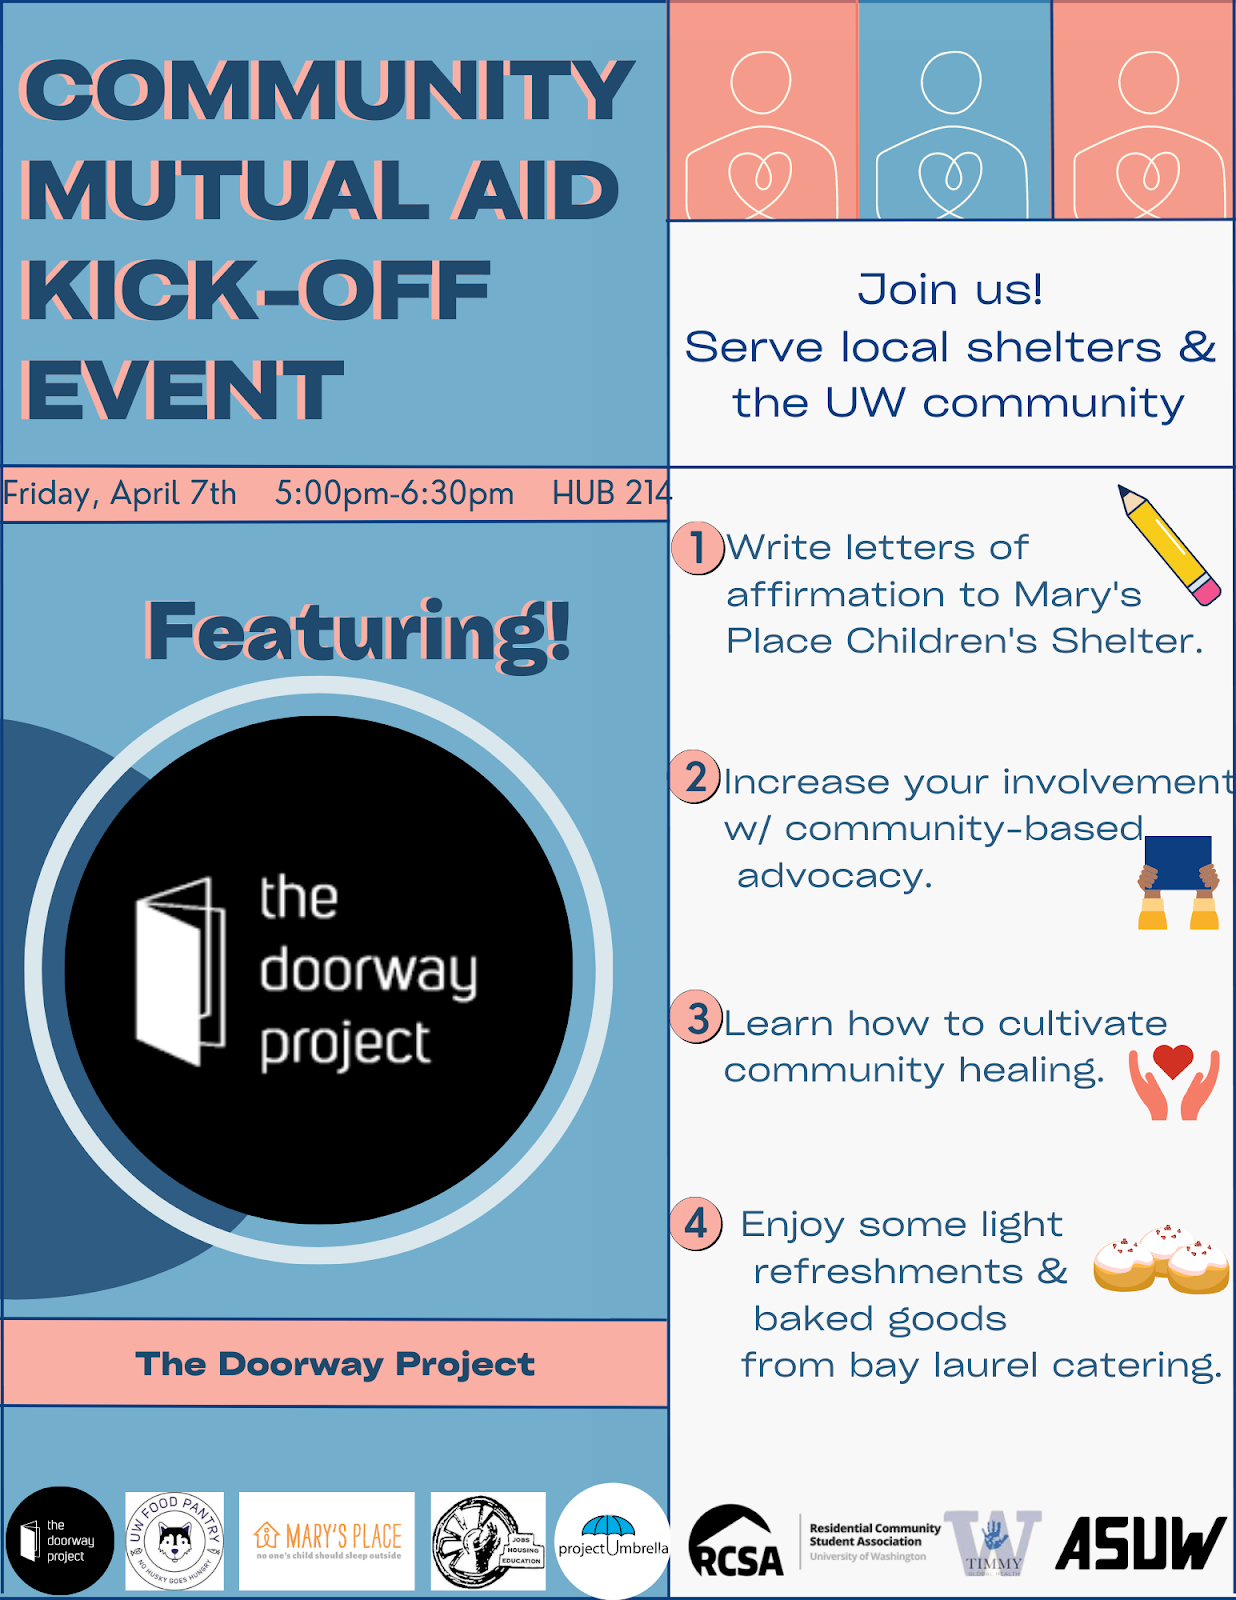 Community Mutual Aid Kick-off Event flyer